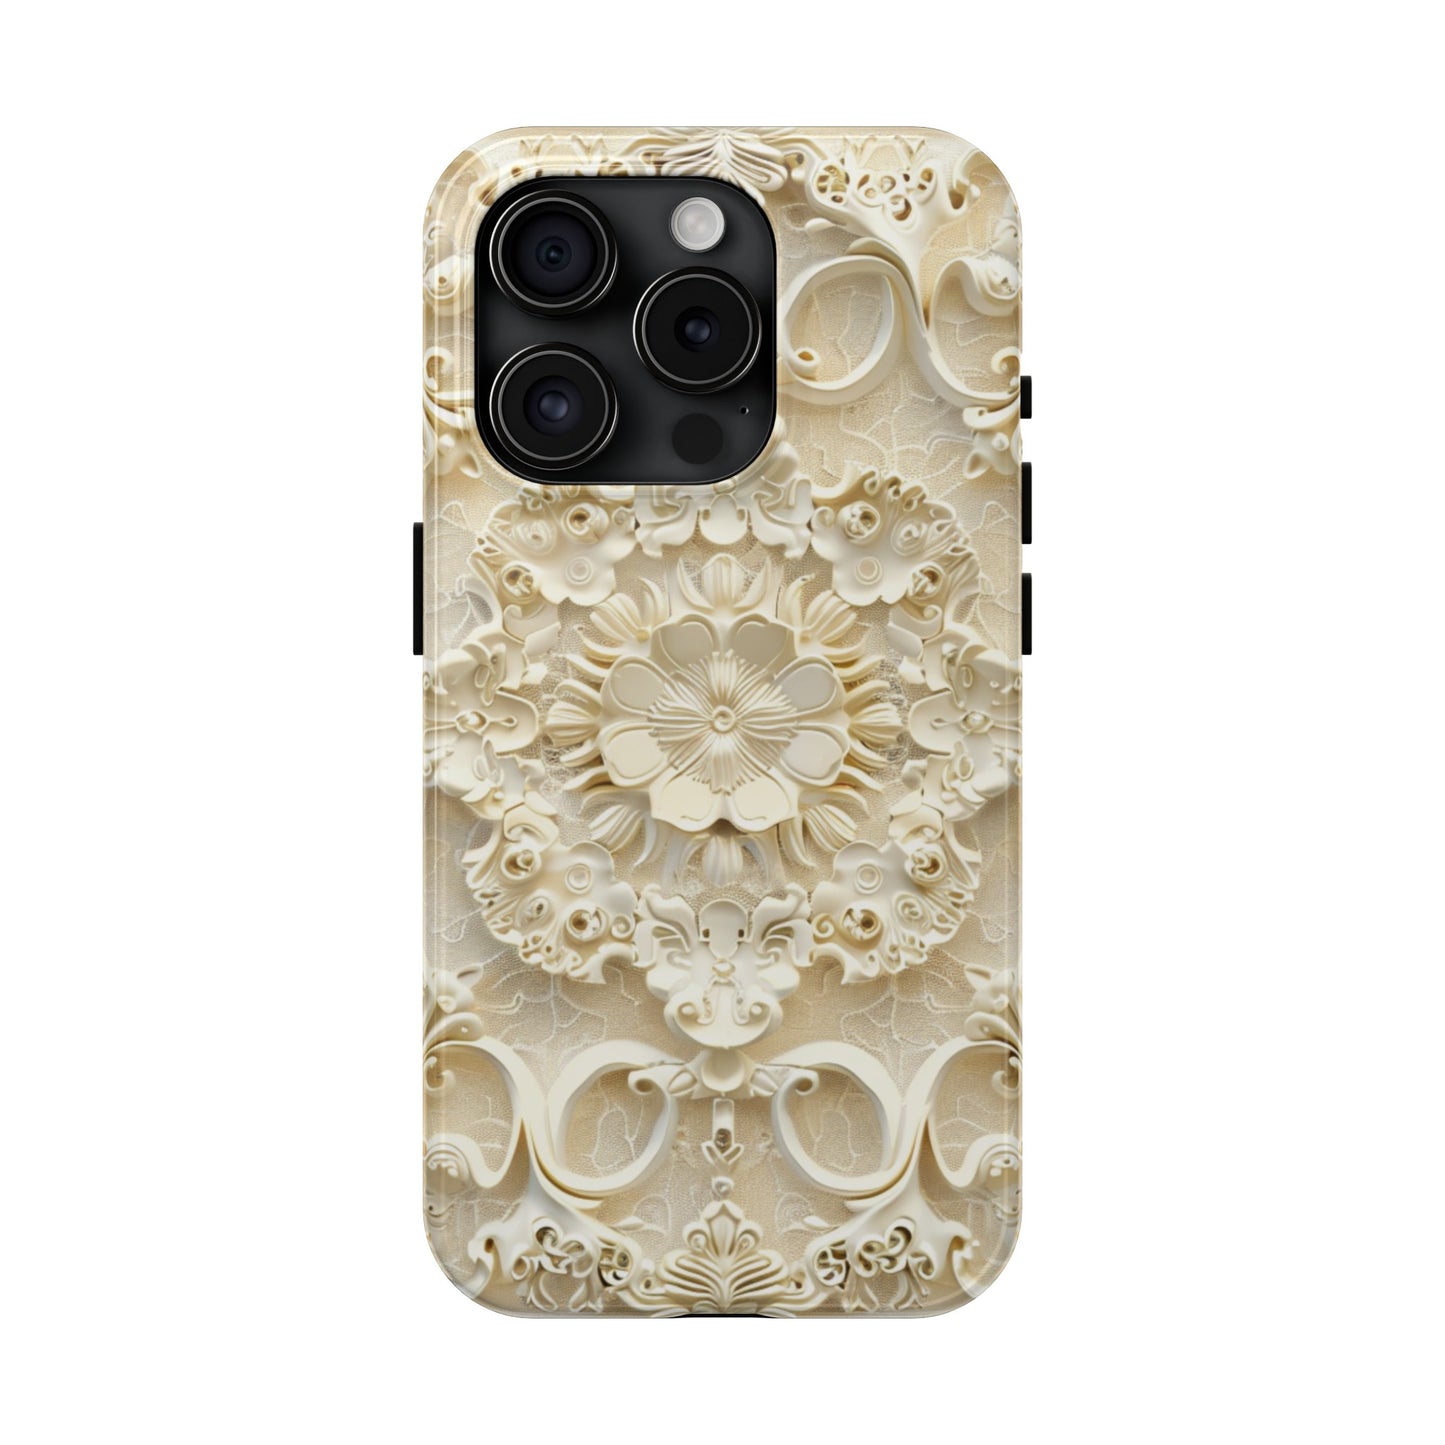 3D Vintage lace pattern in soft ivory and gold-